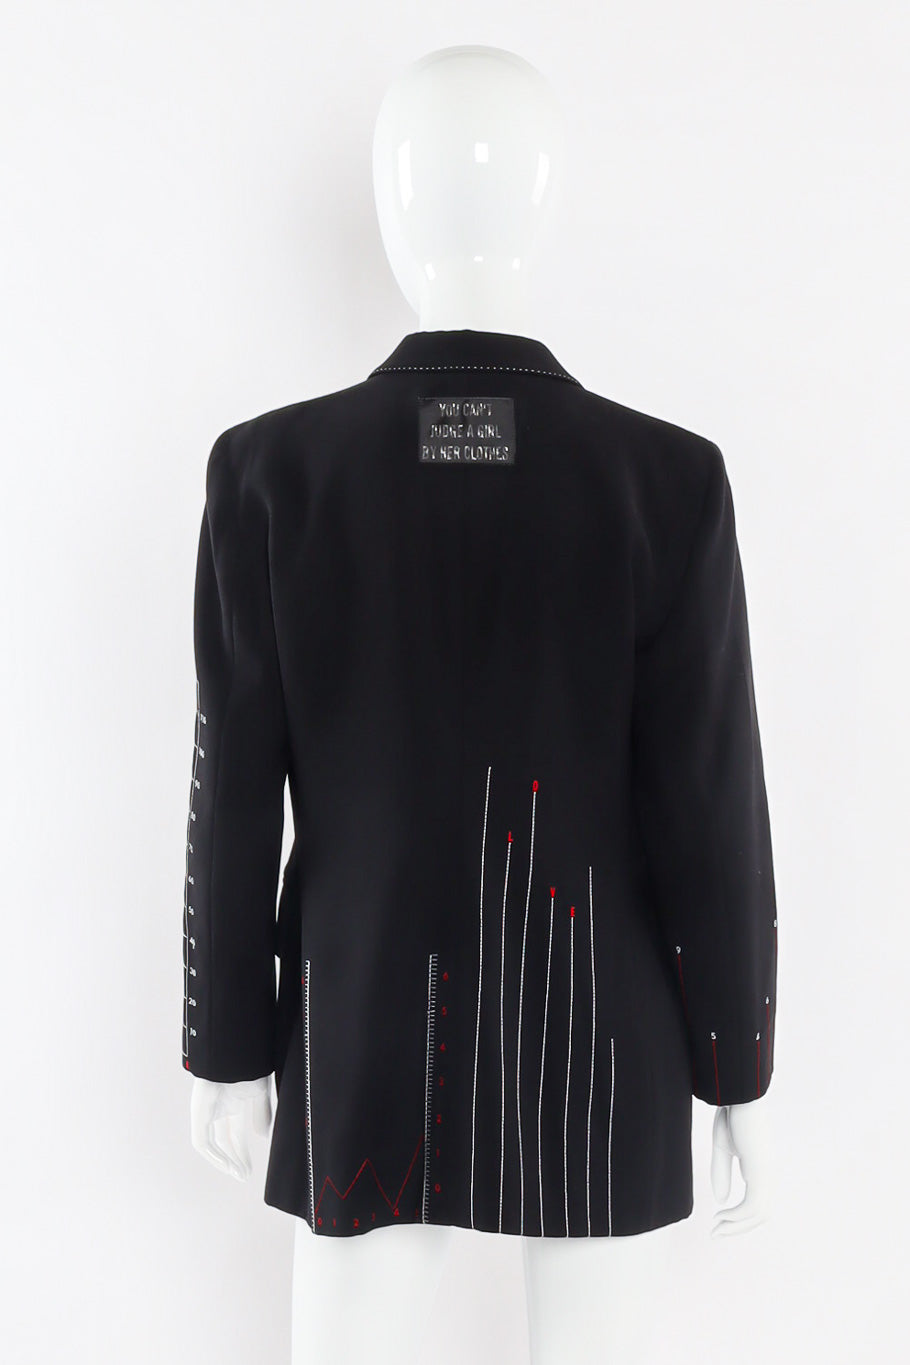 Embroidered graph blazer by Moschino back view mannequin @recessla